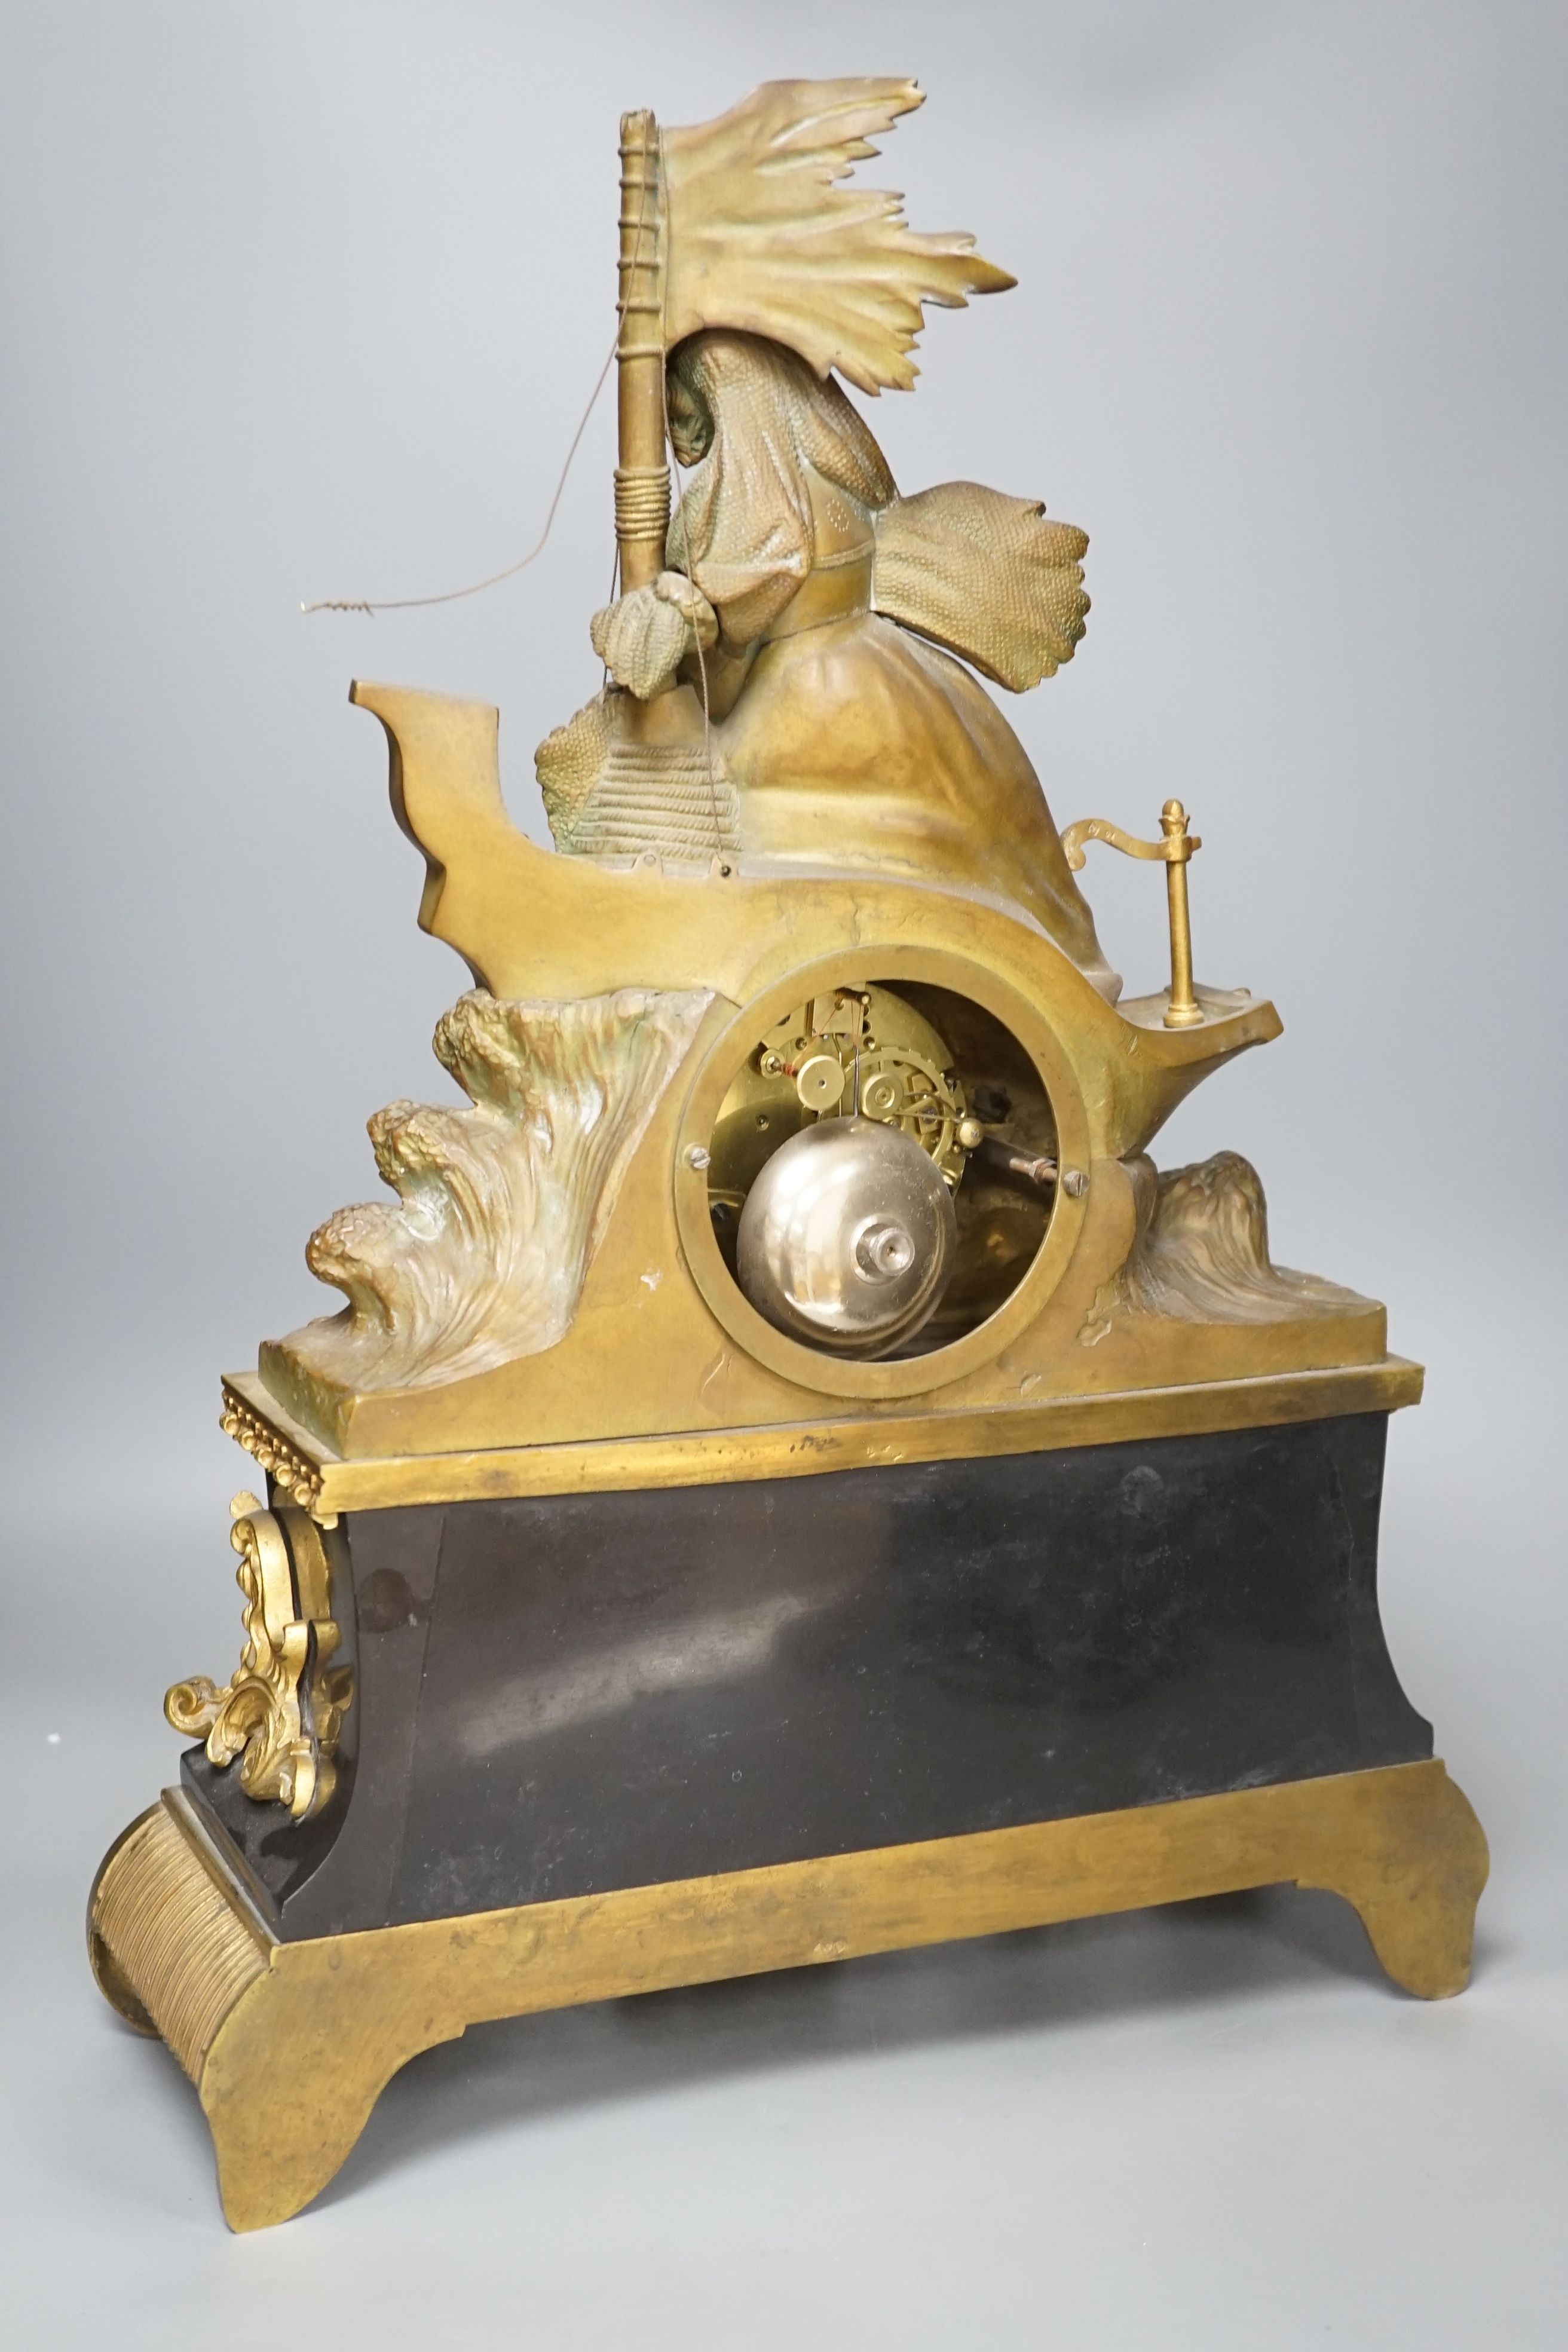 A 19th century French bronze and ormolu mounted black marble mantel clock, 48cms high.